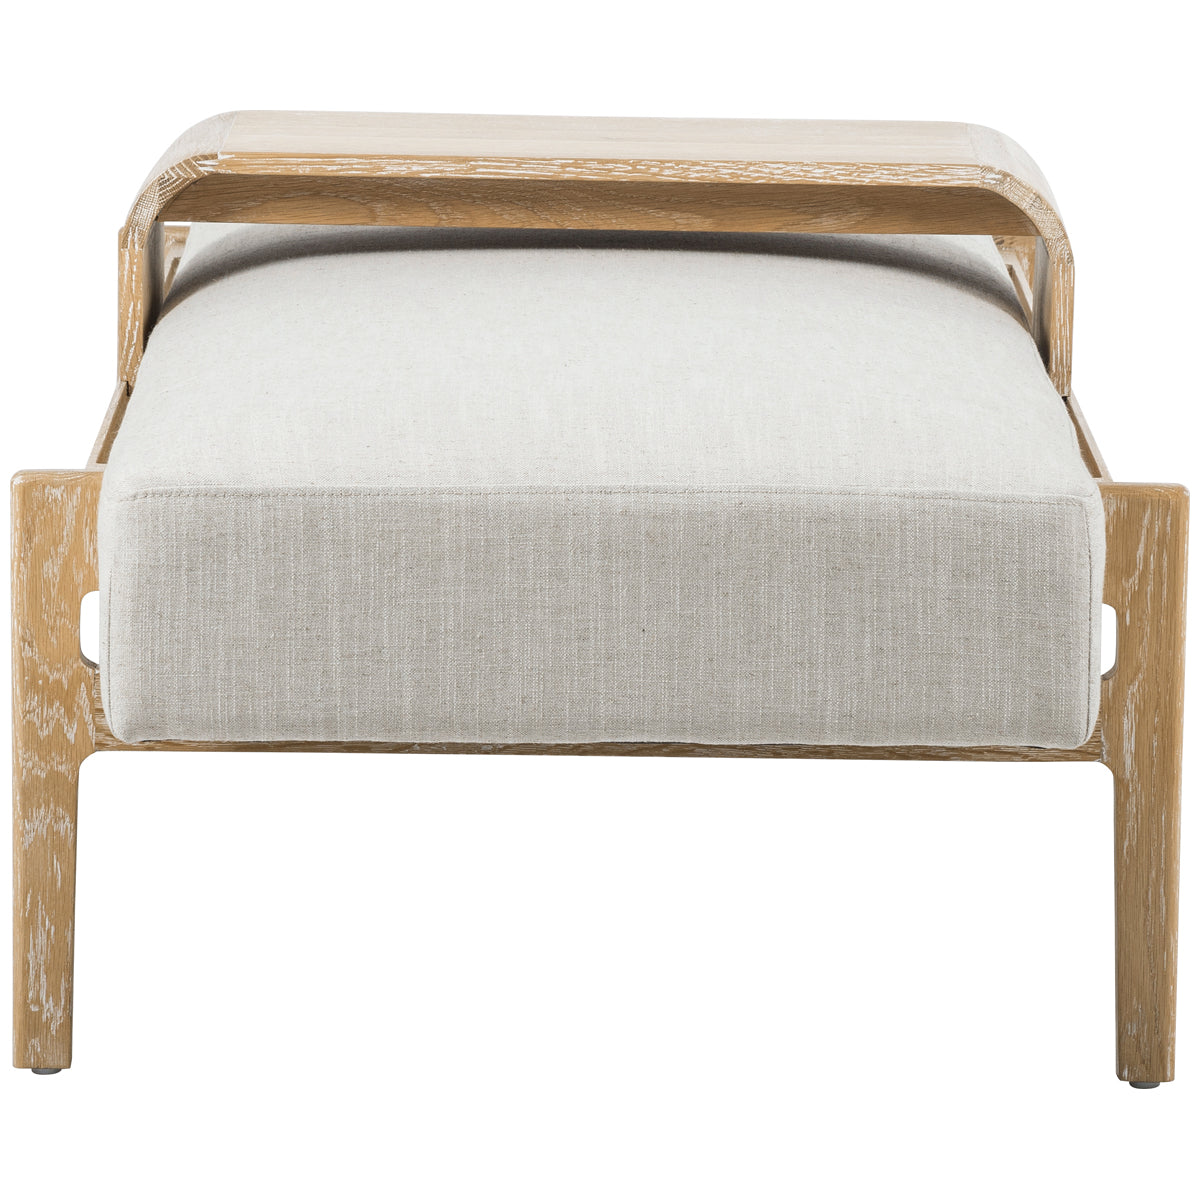 Four Hands Townsend Fawkes Bench - Vintage White Wash Oak